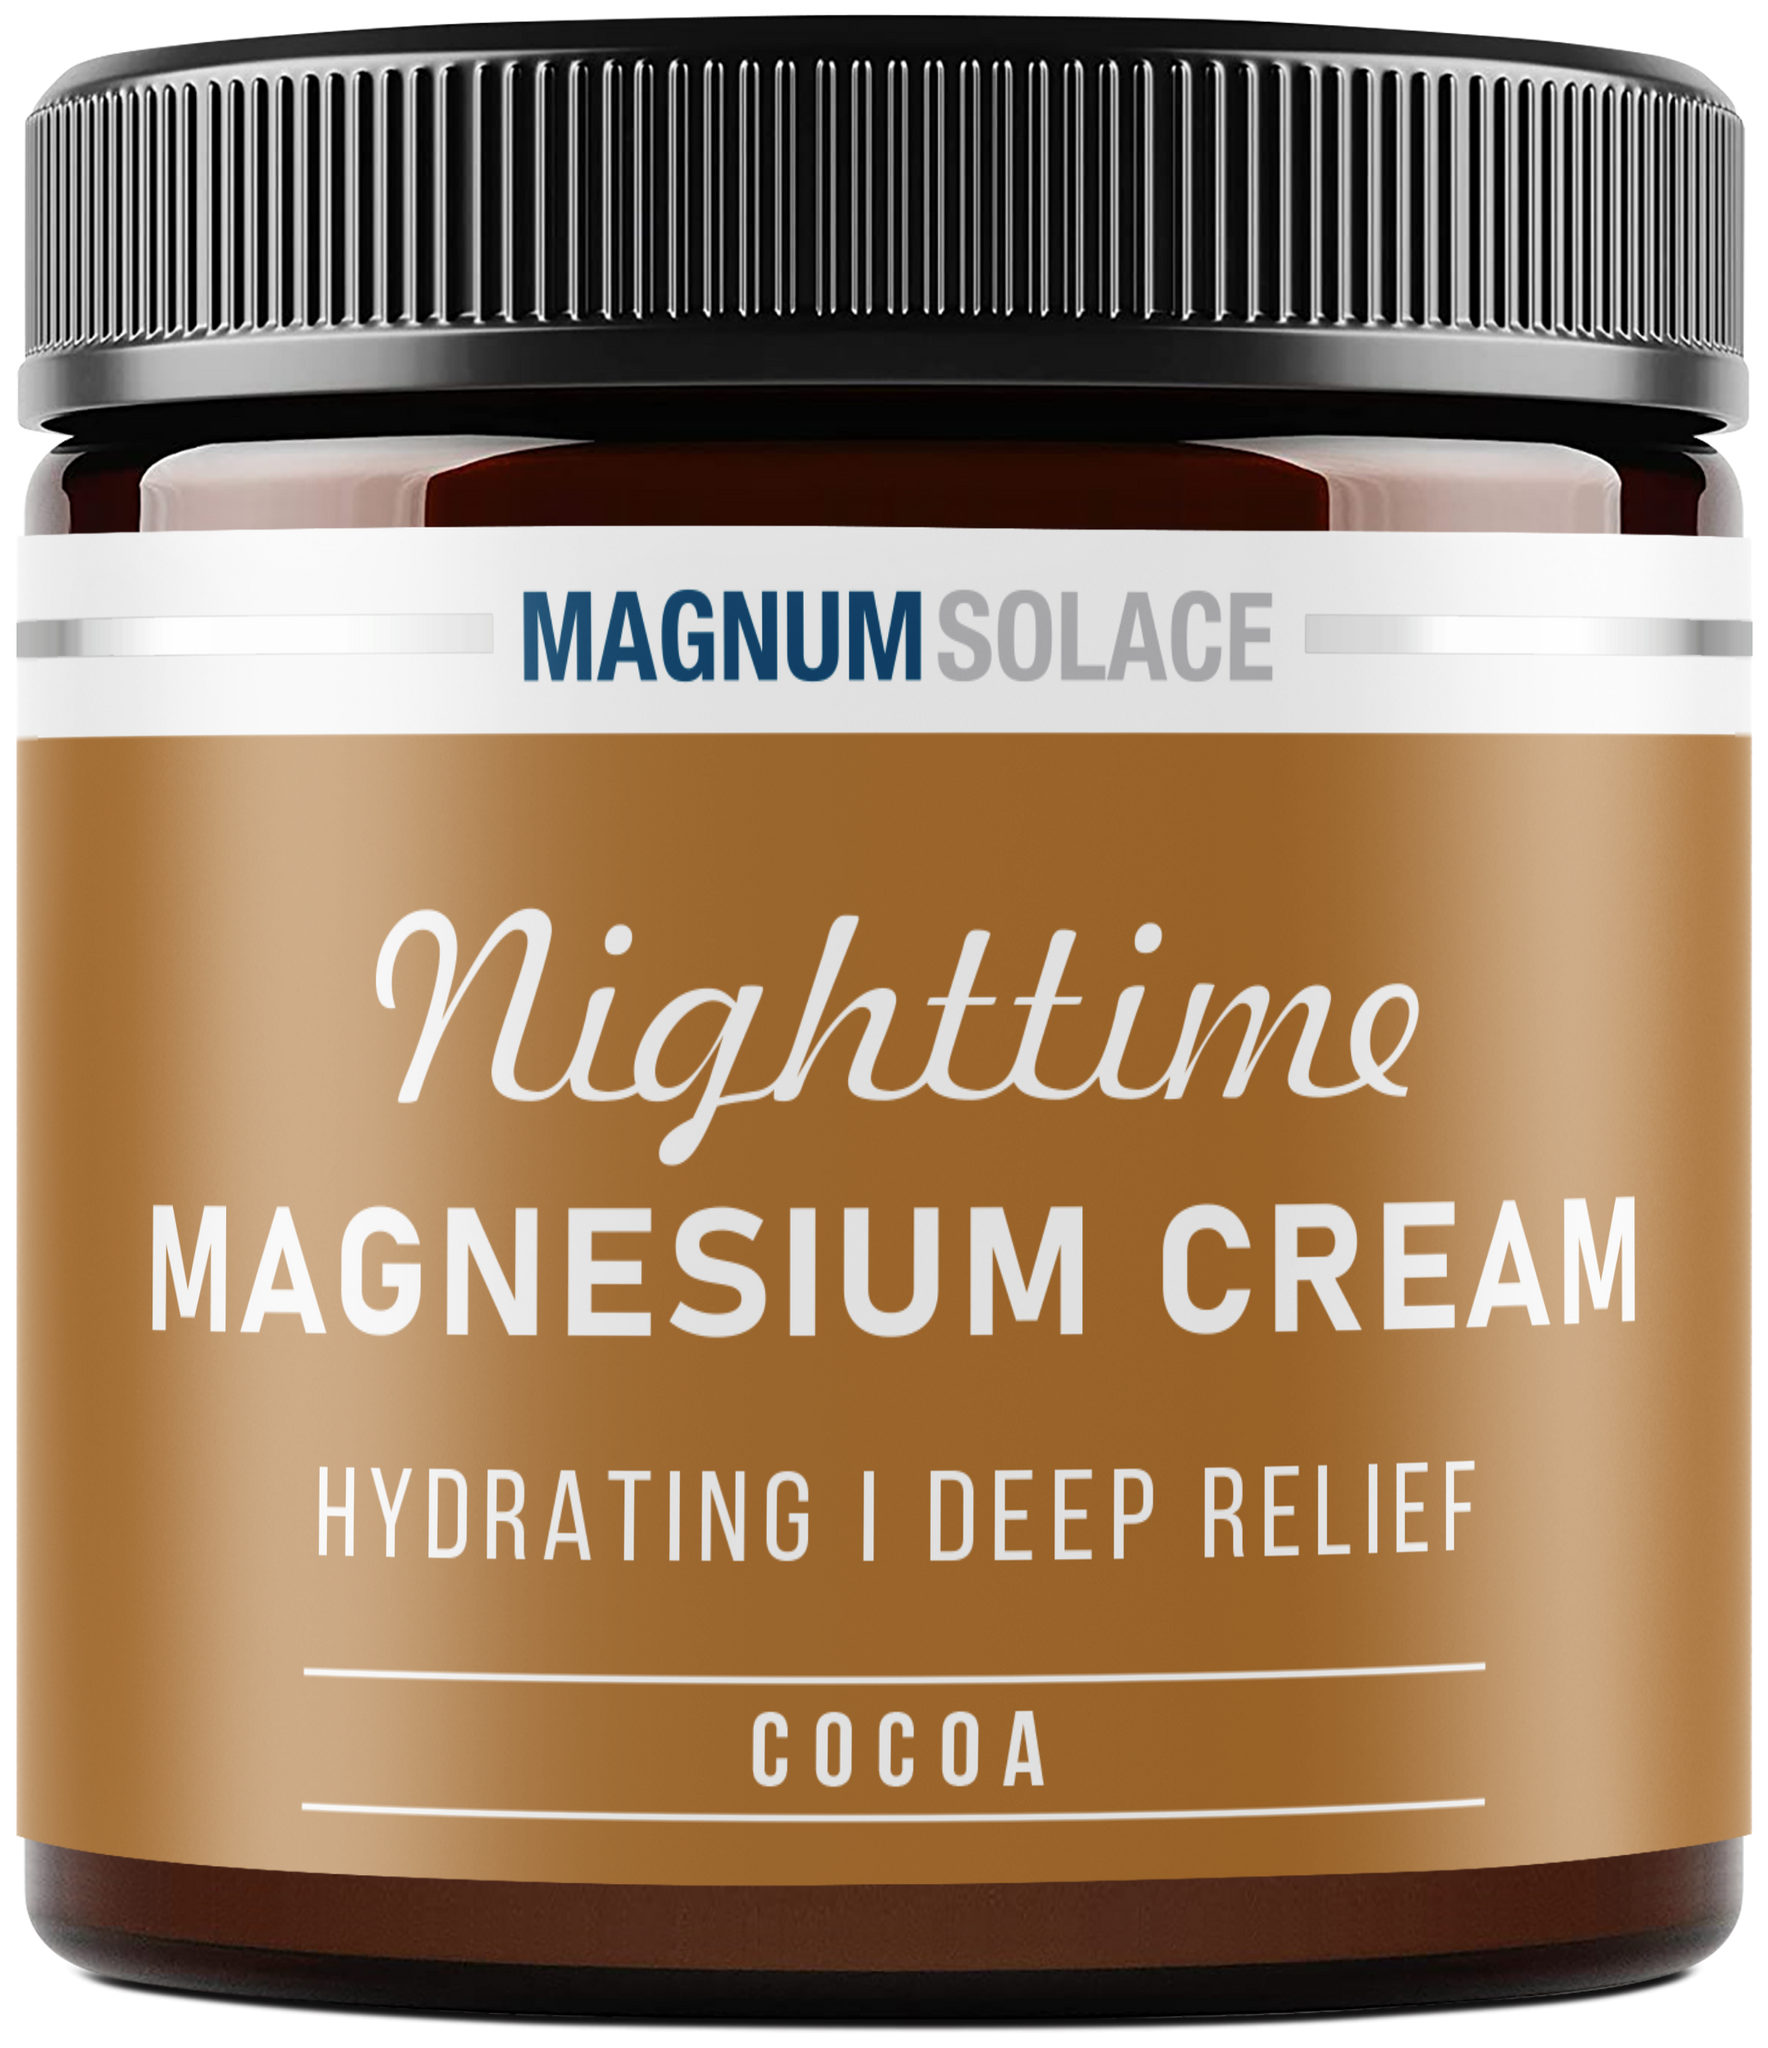 Magnum Solace - Nighttime Magnesium Cream - all things being eco chilliwack - organic and natural skincare - natural body lotion